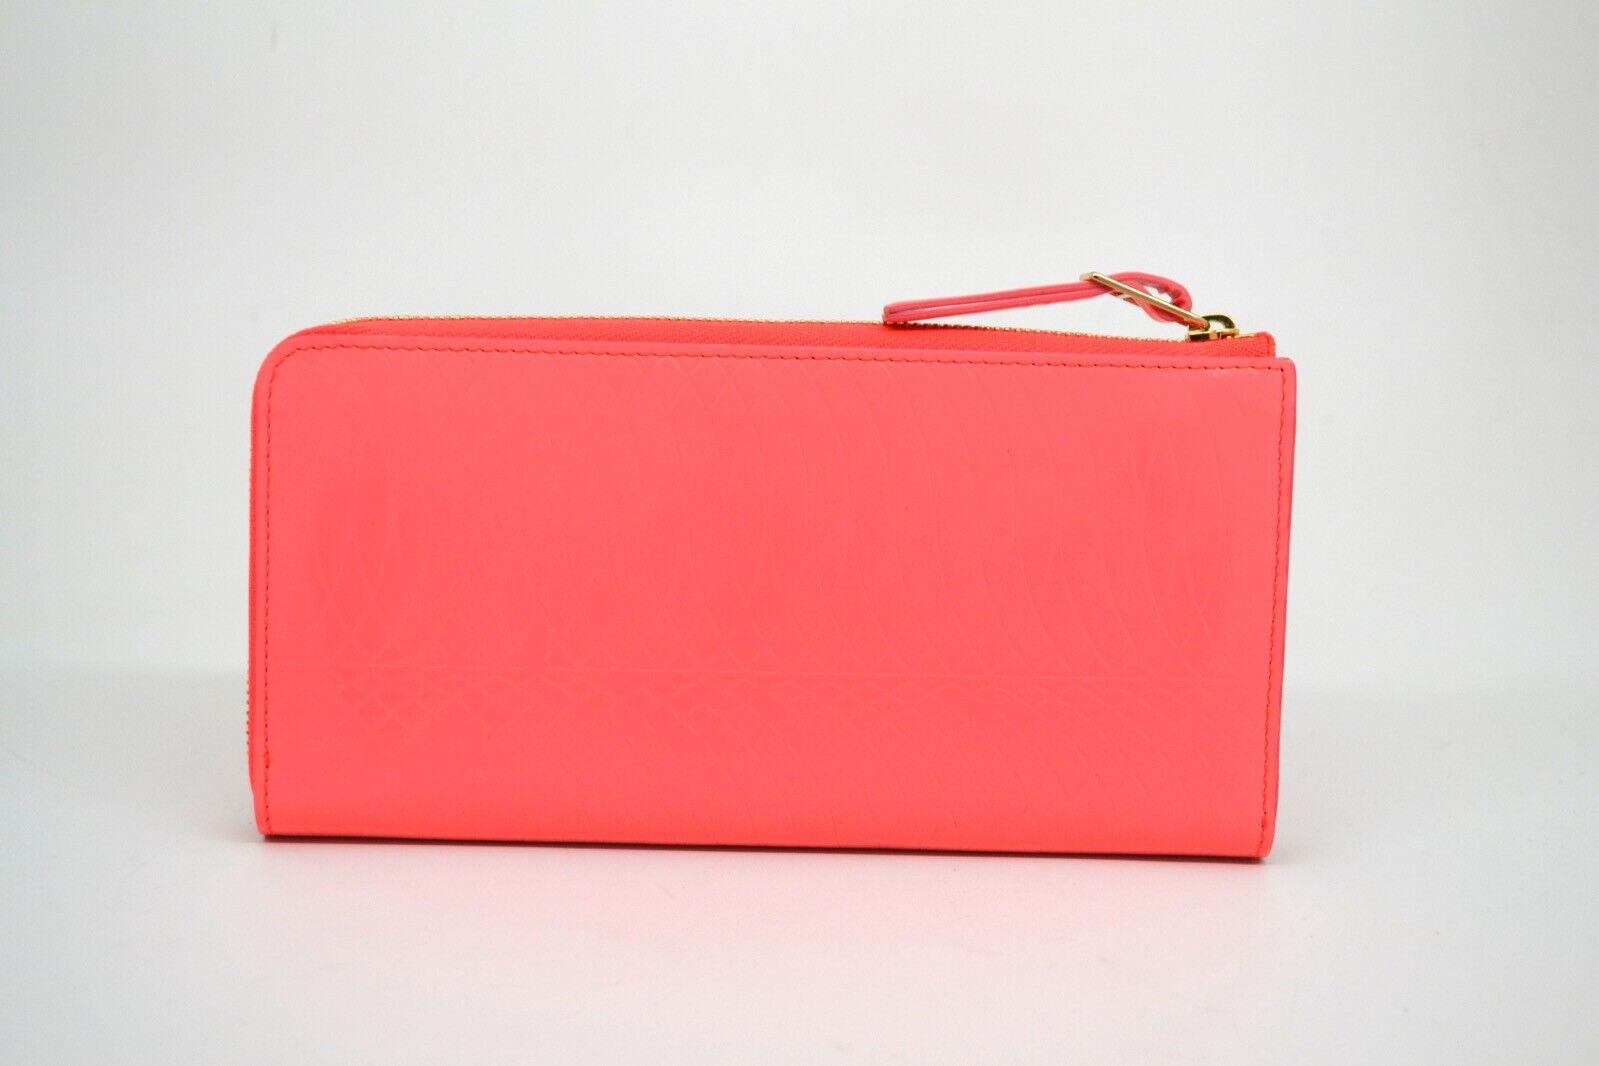 Paul Smith No9 Femmes Grand Fort Worth Mall Rose Porte-Monnaie Fermeture Éclair In stock